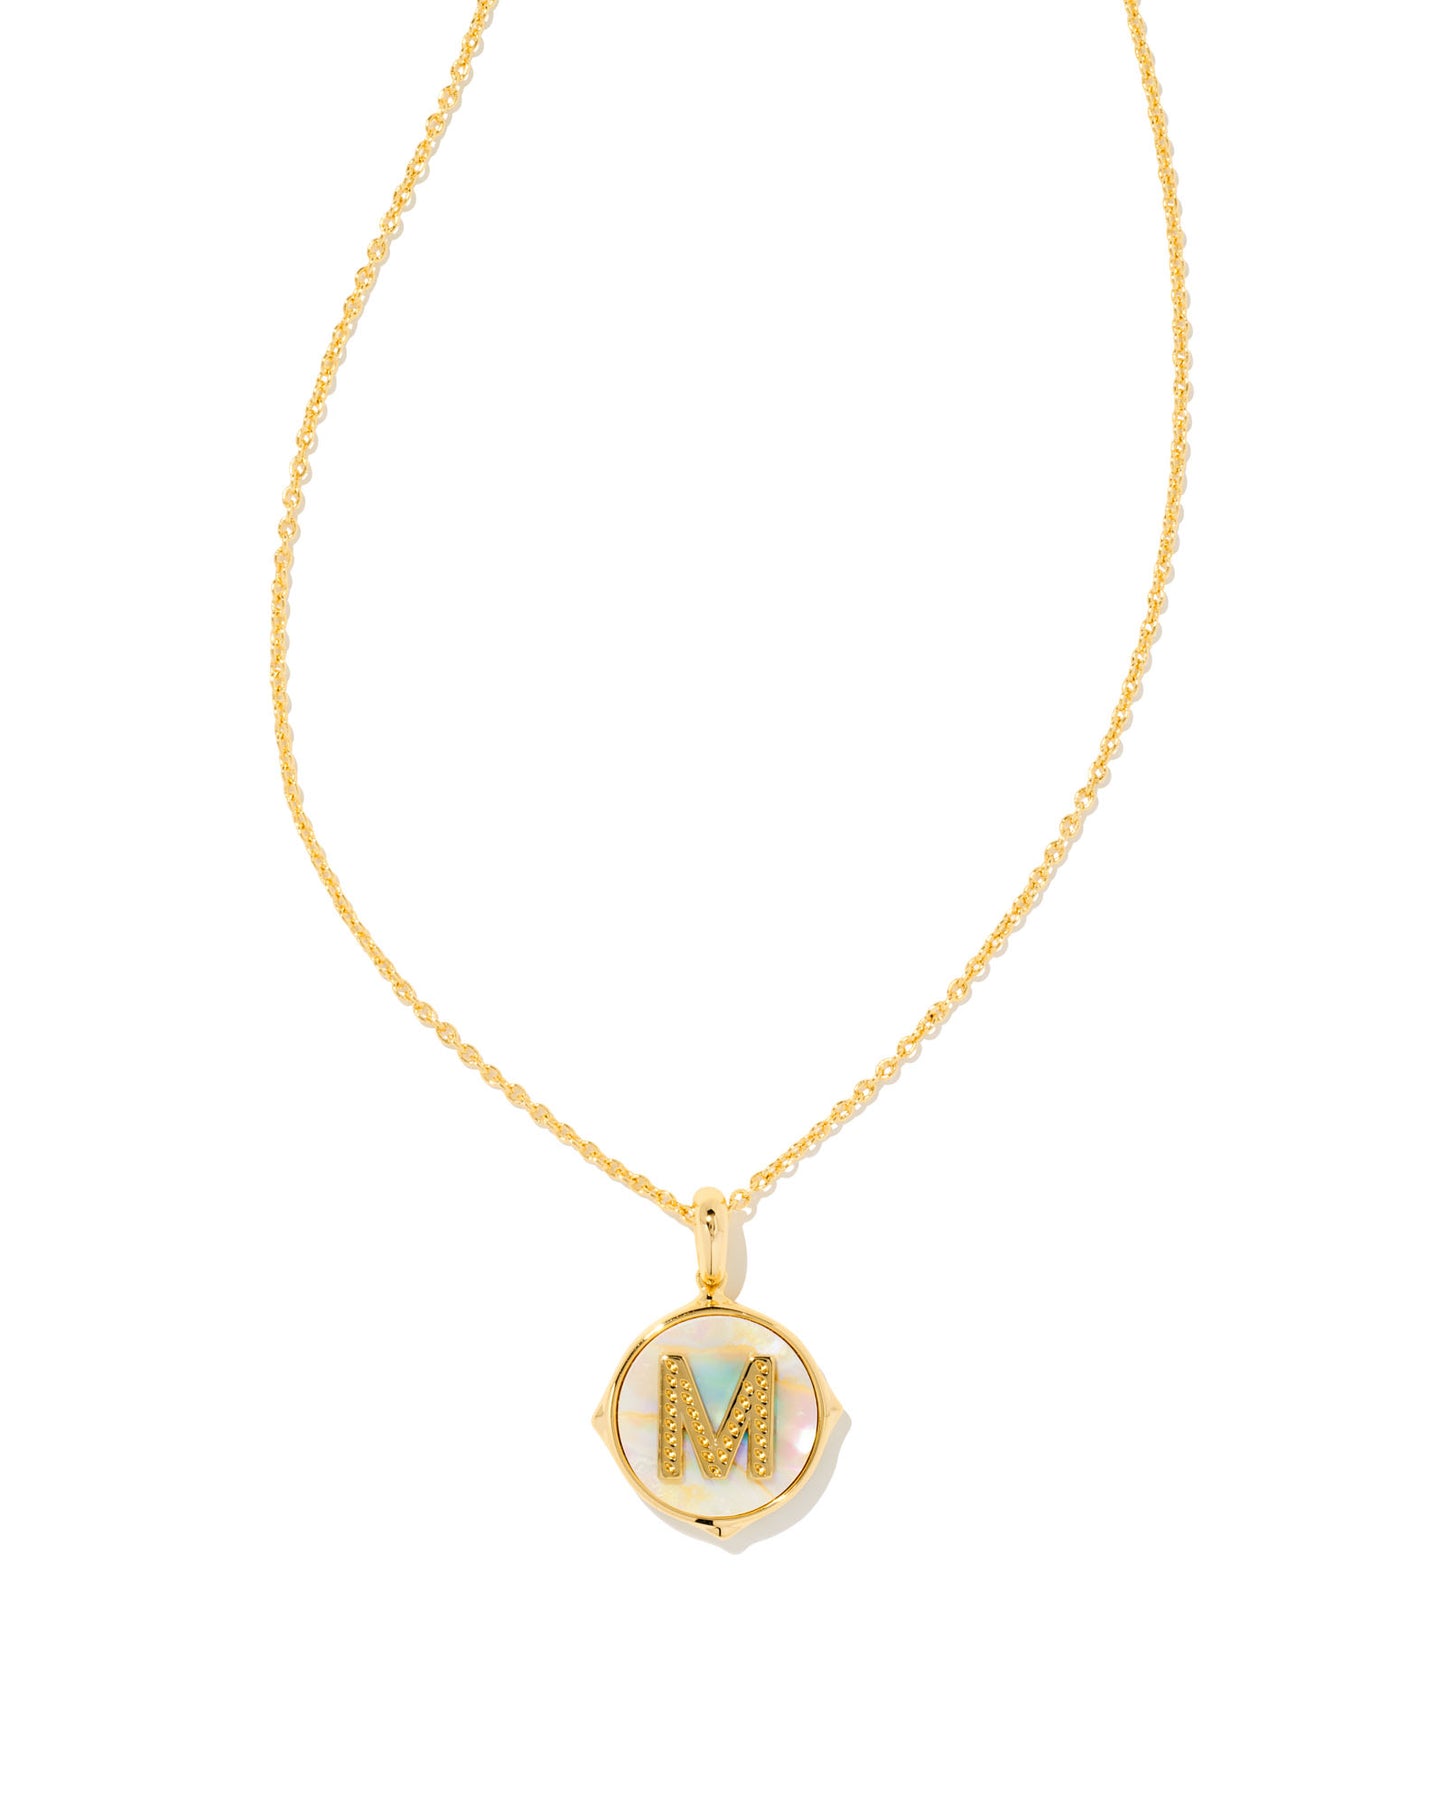 KENDRA SCOTT: Letter Disc Pendant Necklace in Gold/Iridescent Abalone